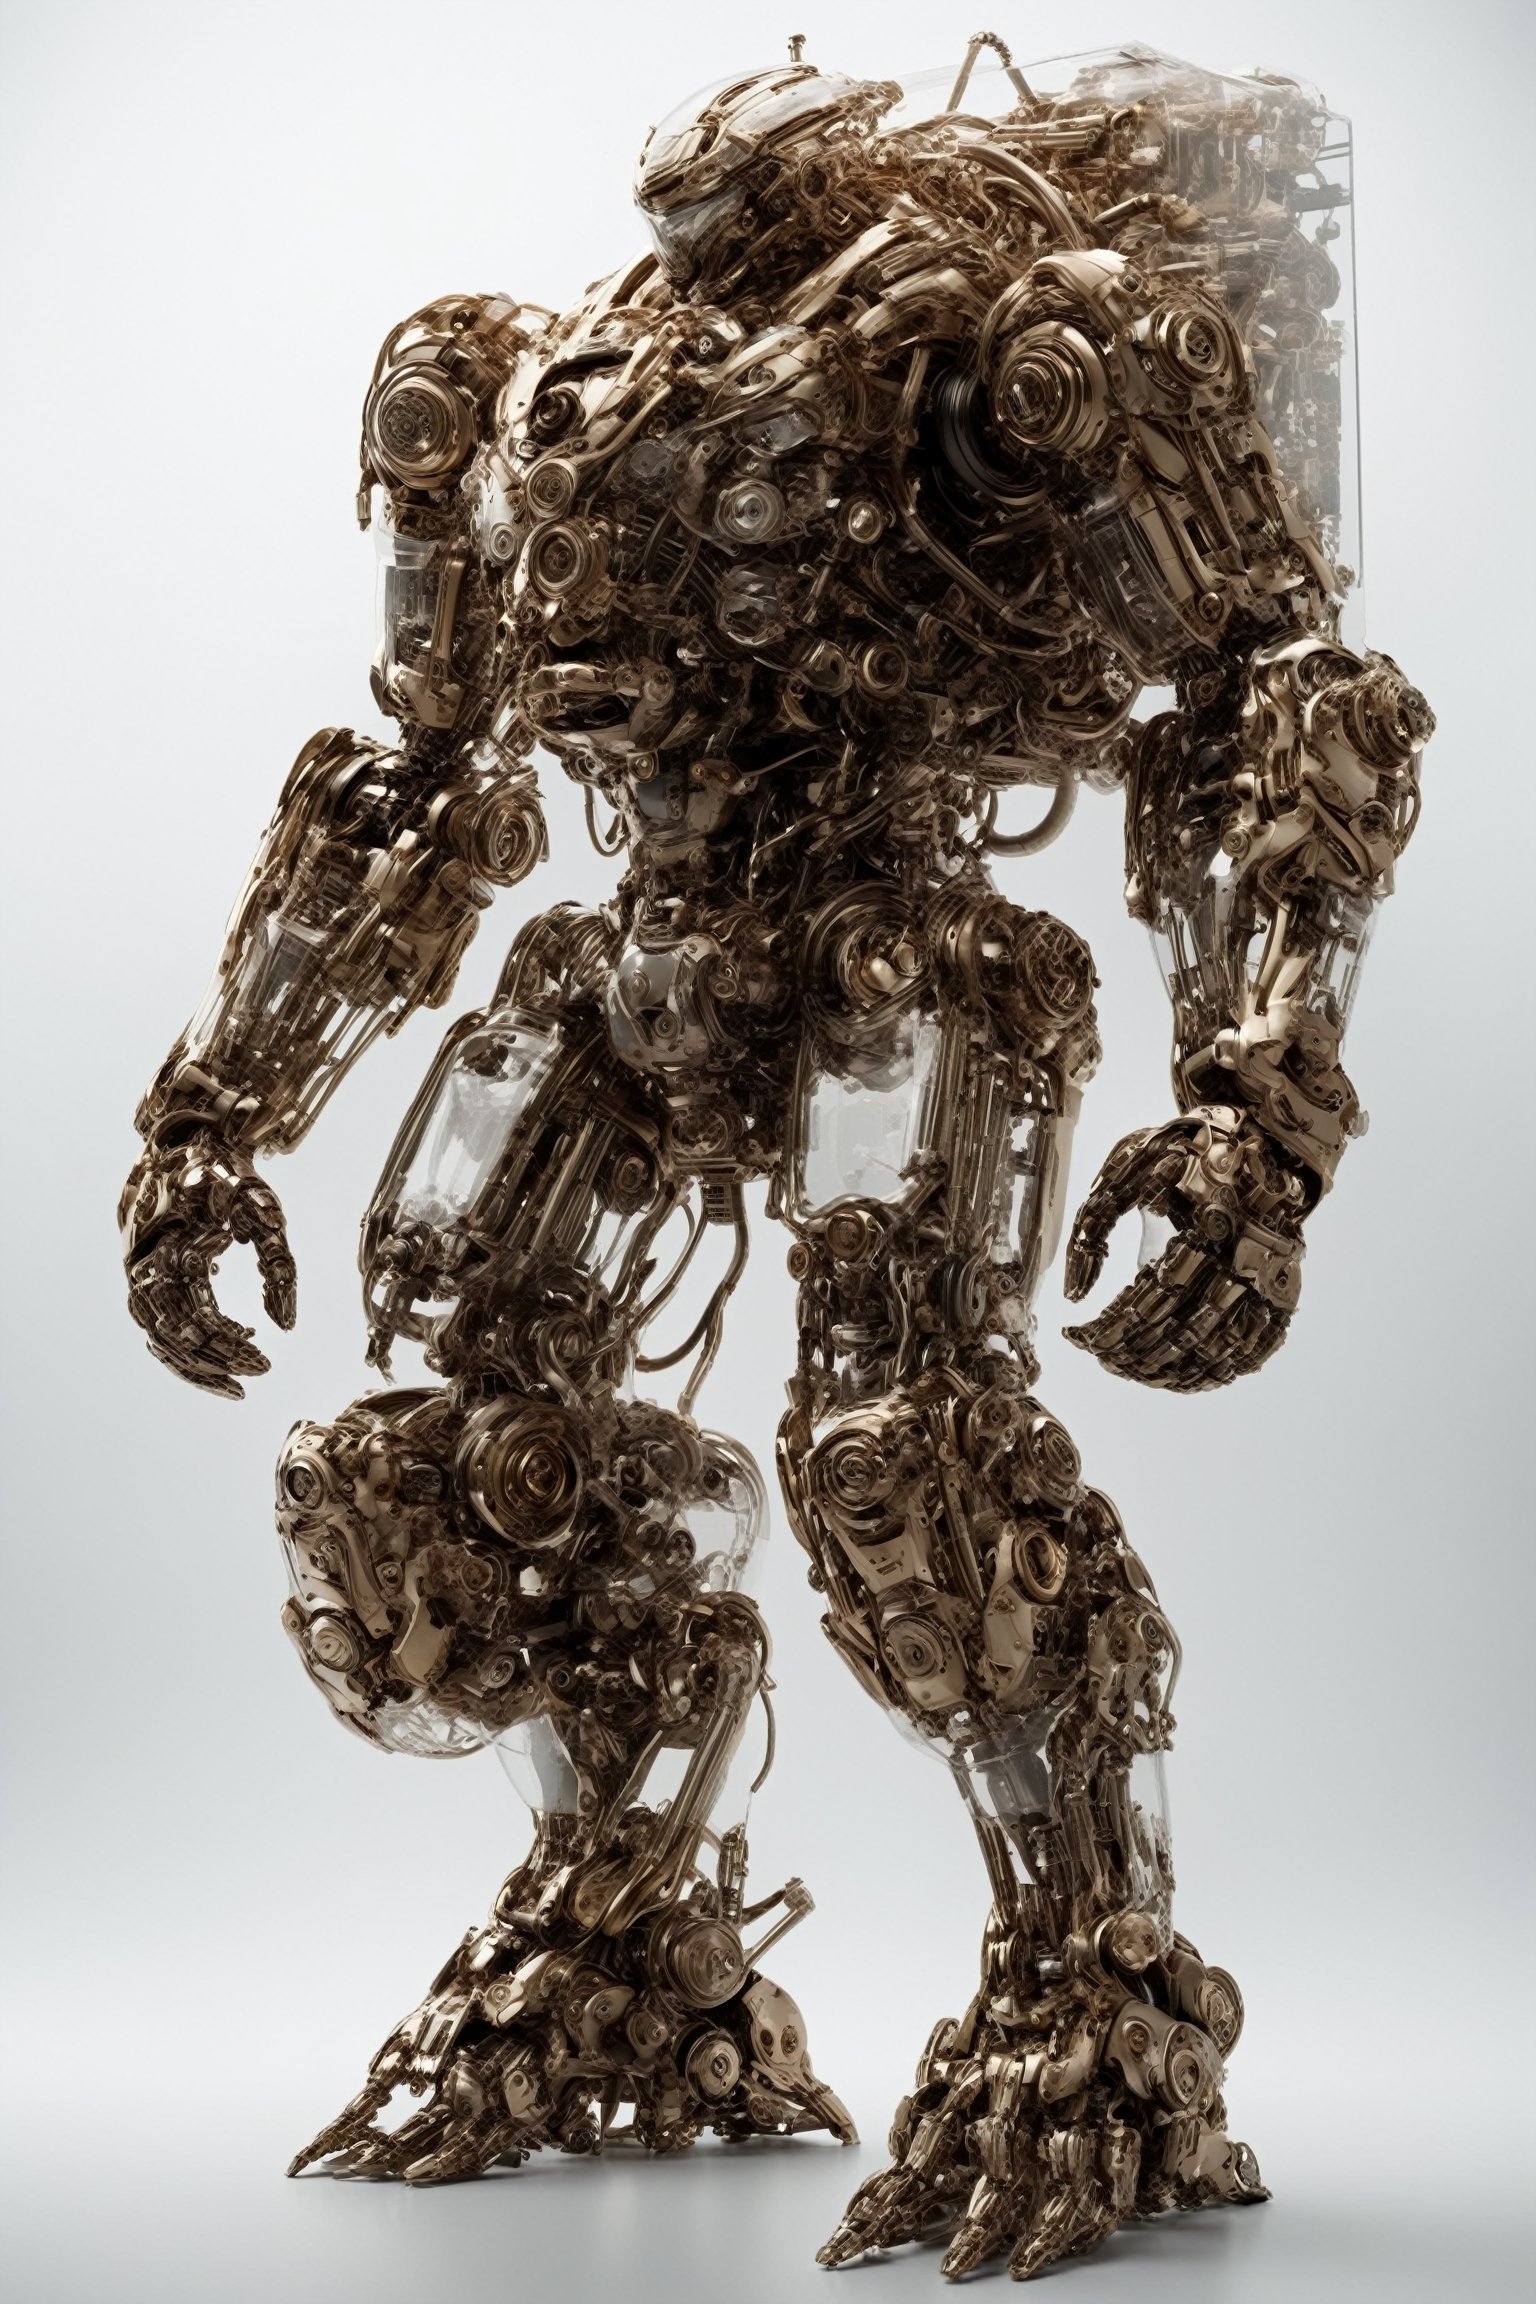 real robot figure,Giant humanoid Machine, adorned with transparent body parts, revealing the intricate machinery inside, giant robotic weapon, smooth and angular design despite transparent parts, pulsating energy and intricate circuitry visible through transparent body parts.,robot, mechanical arms,Glass Elements,Clear Glass Skin,action figure,anime figure,DonMSt34mPXL